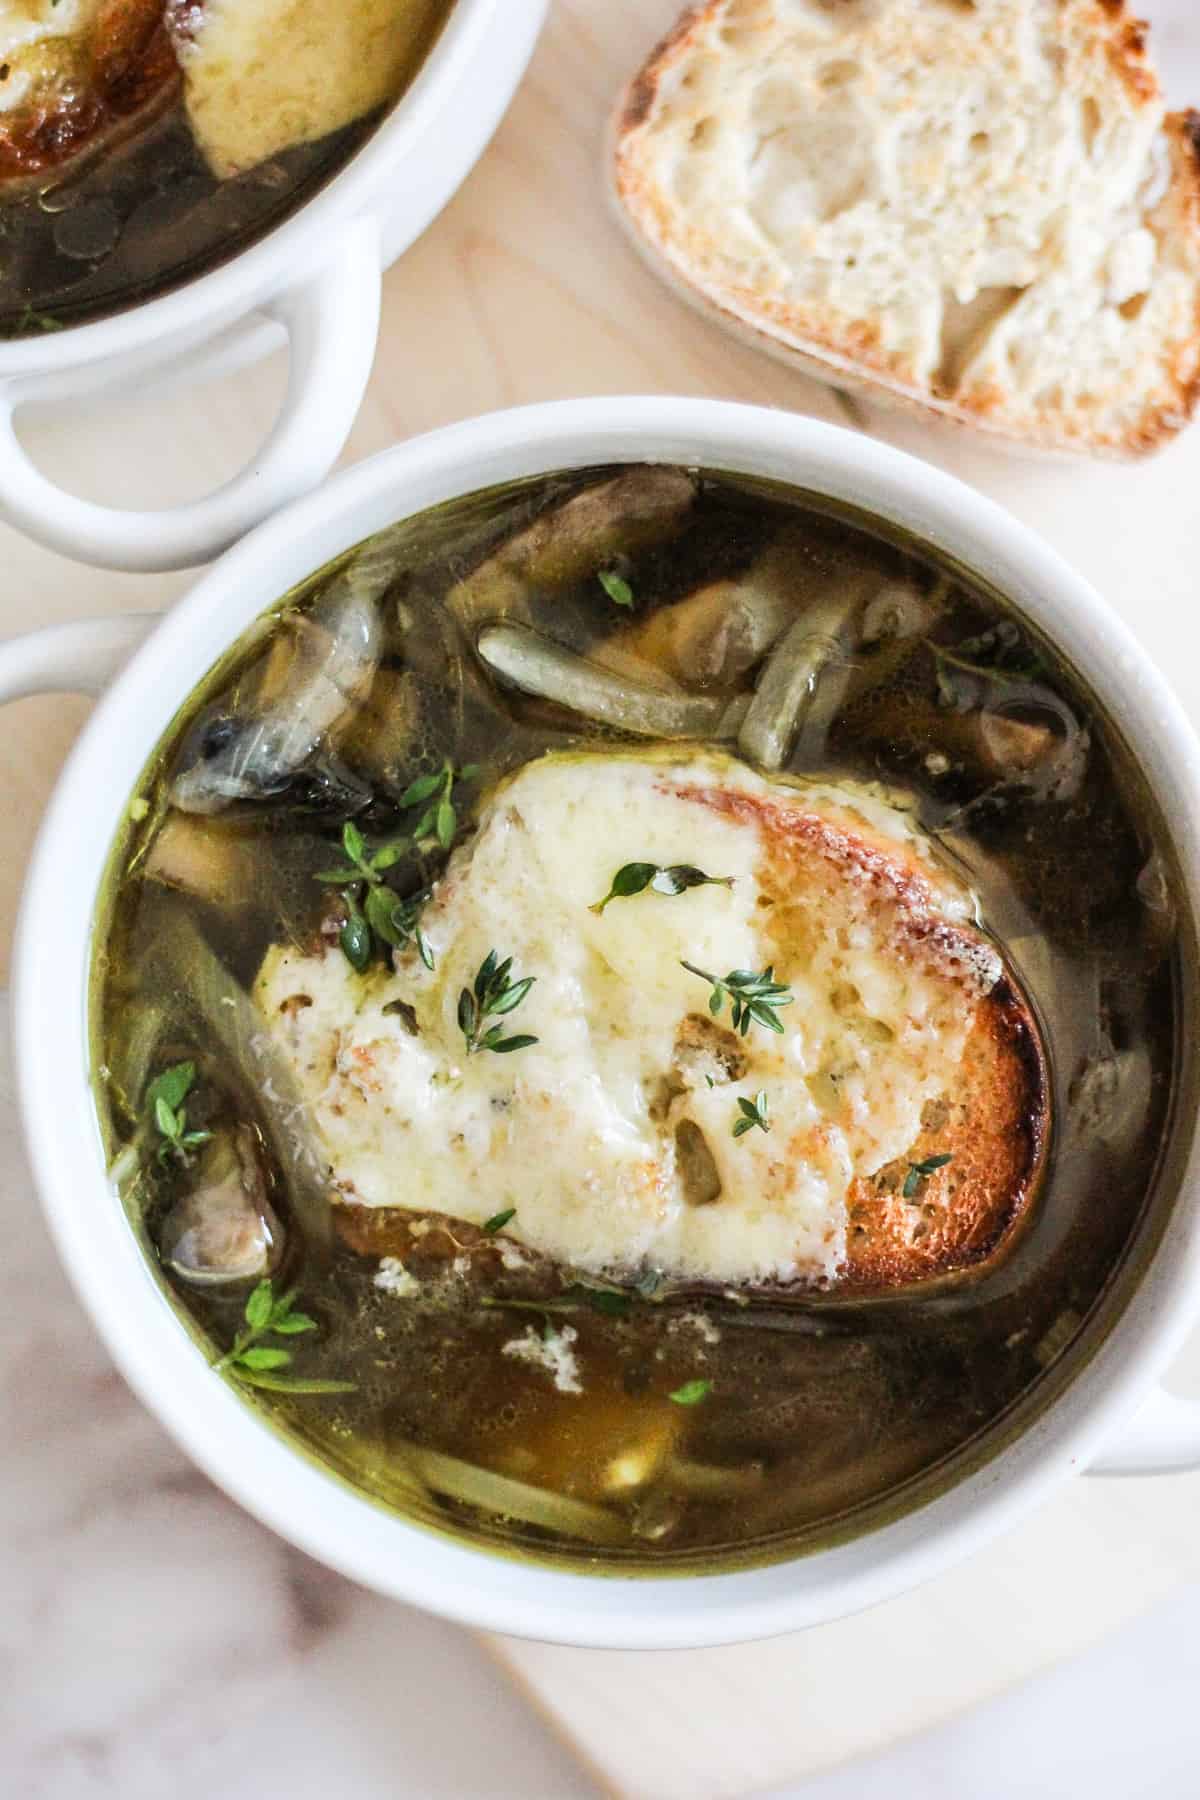 Vegetarian French Onion Soup with portobello mushrooms in a white soup crock on a wood board.